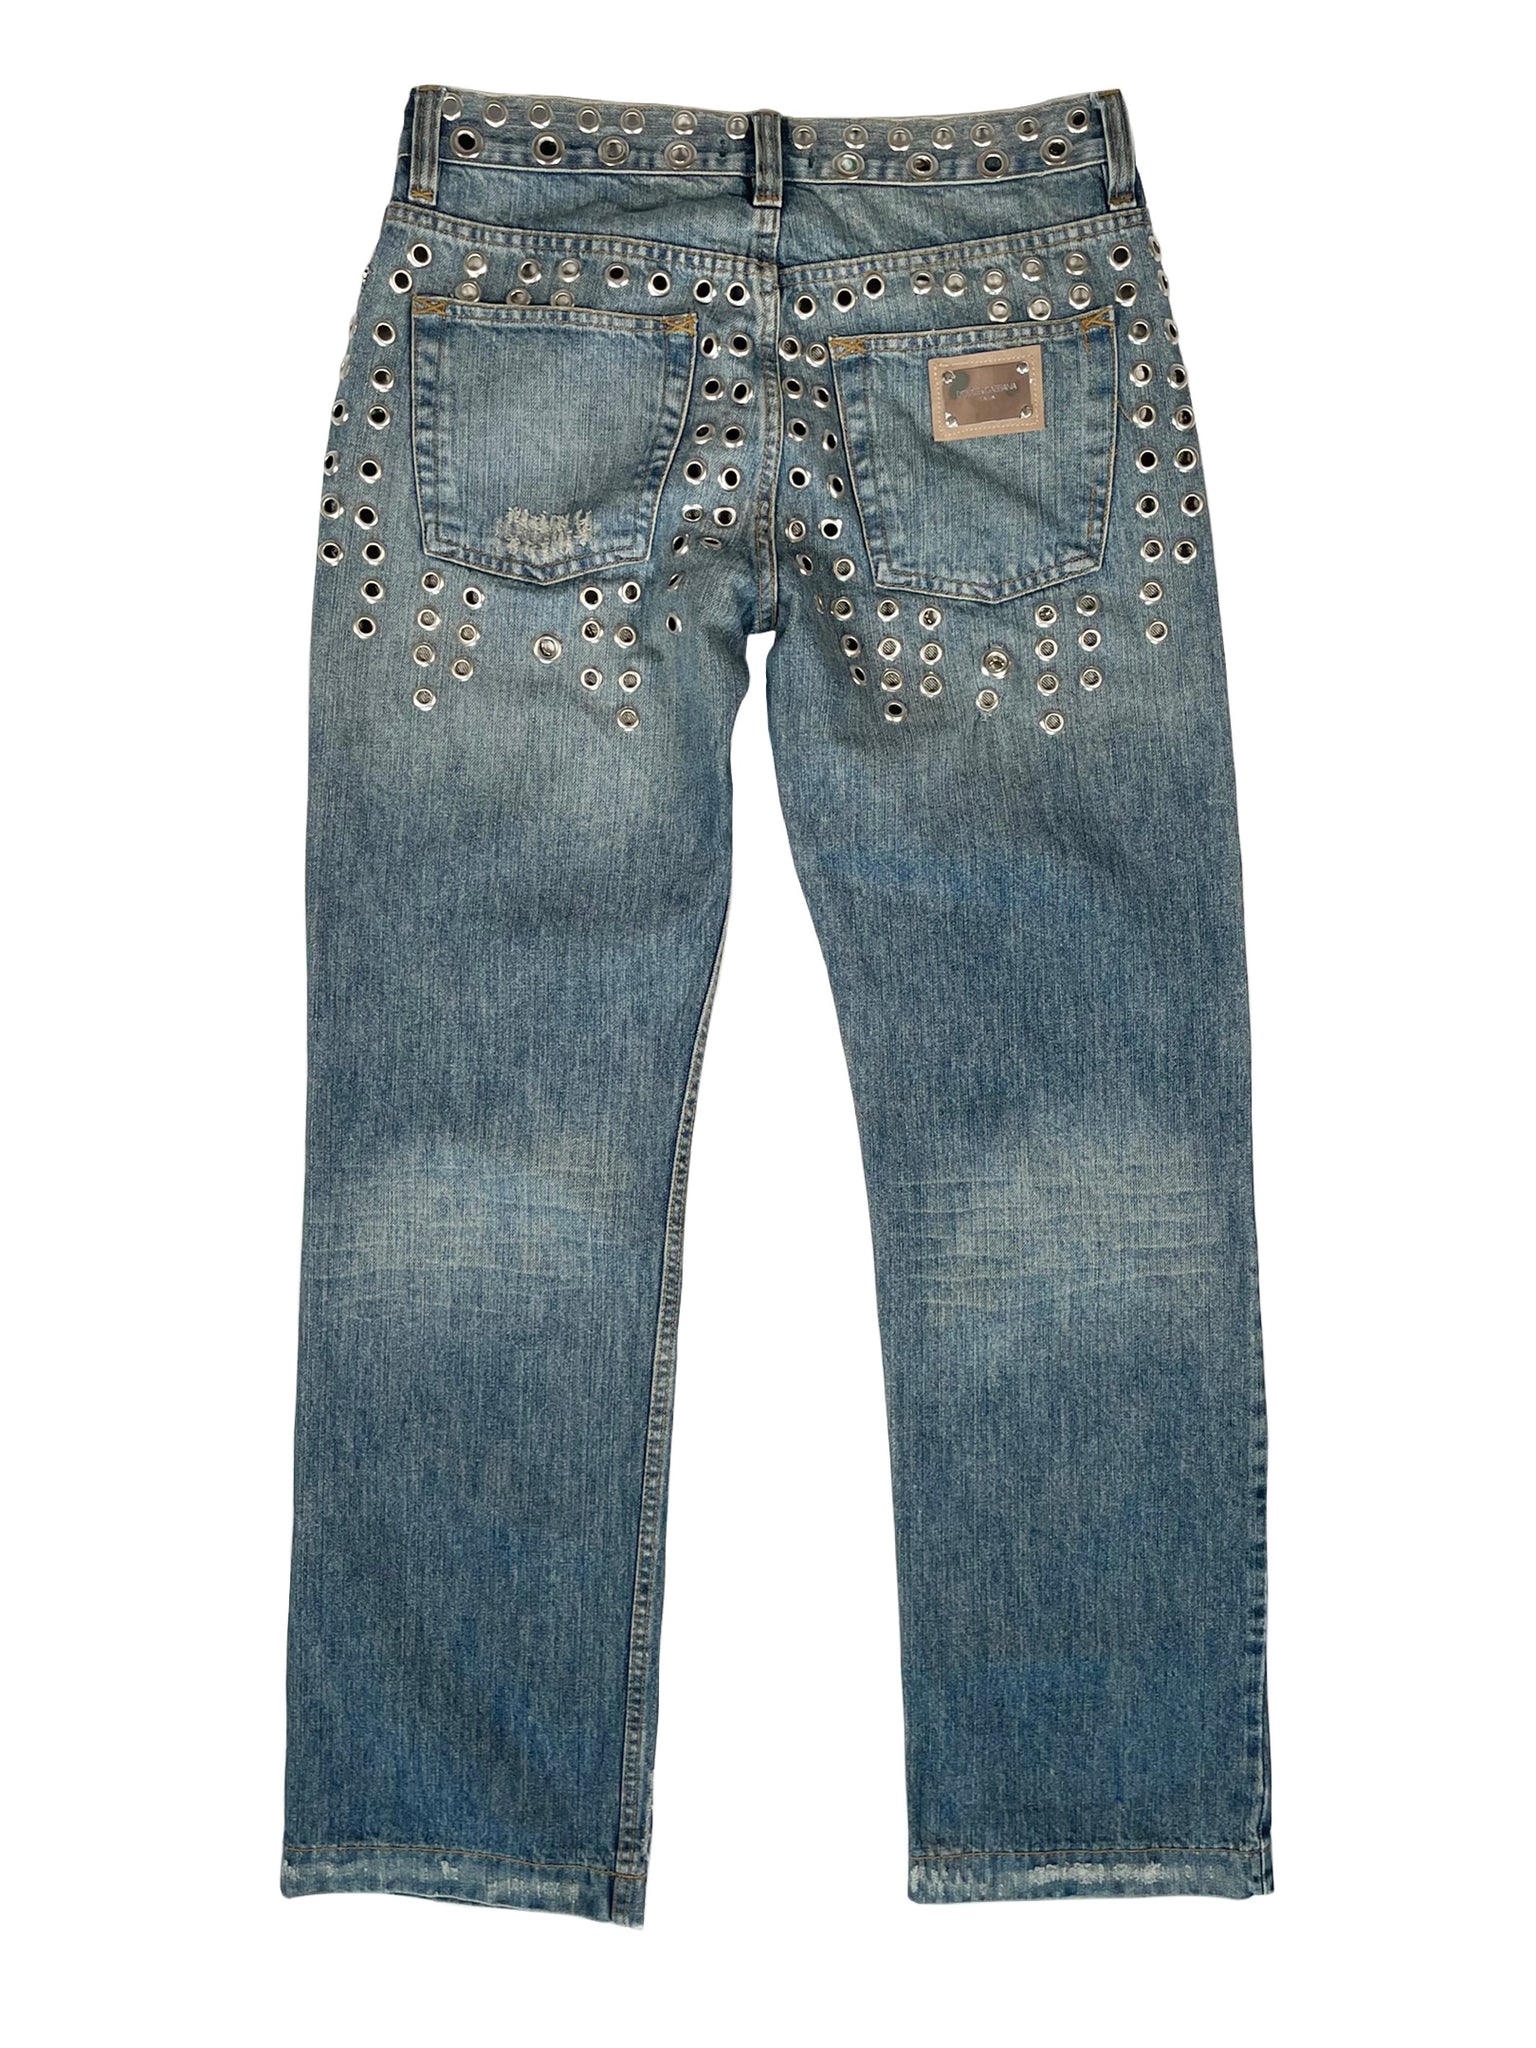 SS2006 Dolce & Gabbana eyelet studded jeans – elevated archives